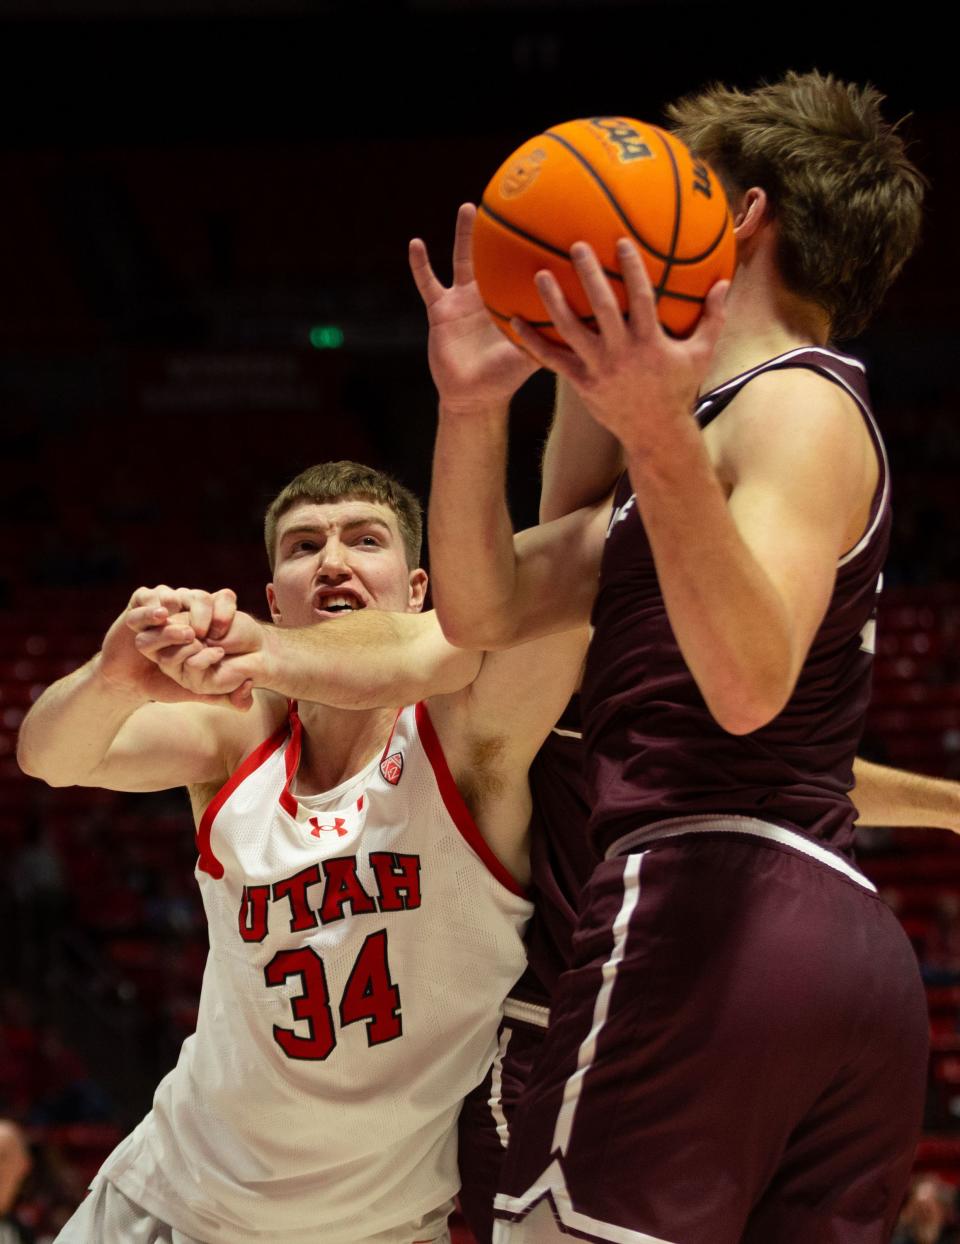 Utah Utes center Lawson Lovering (34) and Bellarmine Knights guard Peter Suder (5) struggle for possession of the ball during the men’s college basketball game between the University of Utah and Bellarmine University at the Jon M. Huntsman Center in Salt Lake City on Wednesday, Dec. 20, 2023. | Megan Nielsen, Deseret News